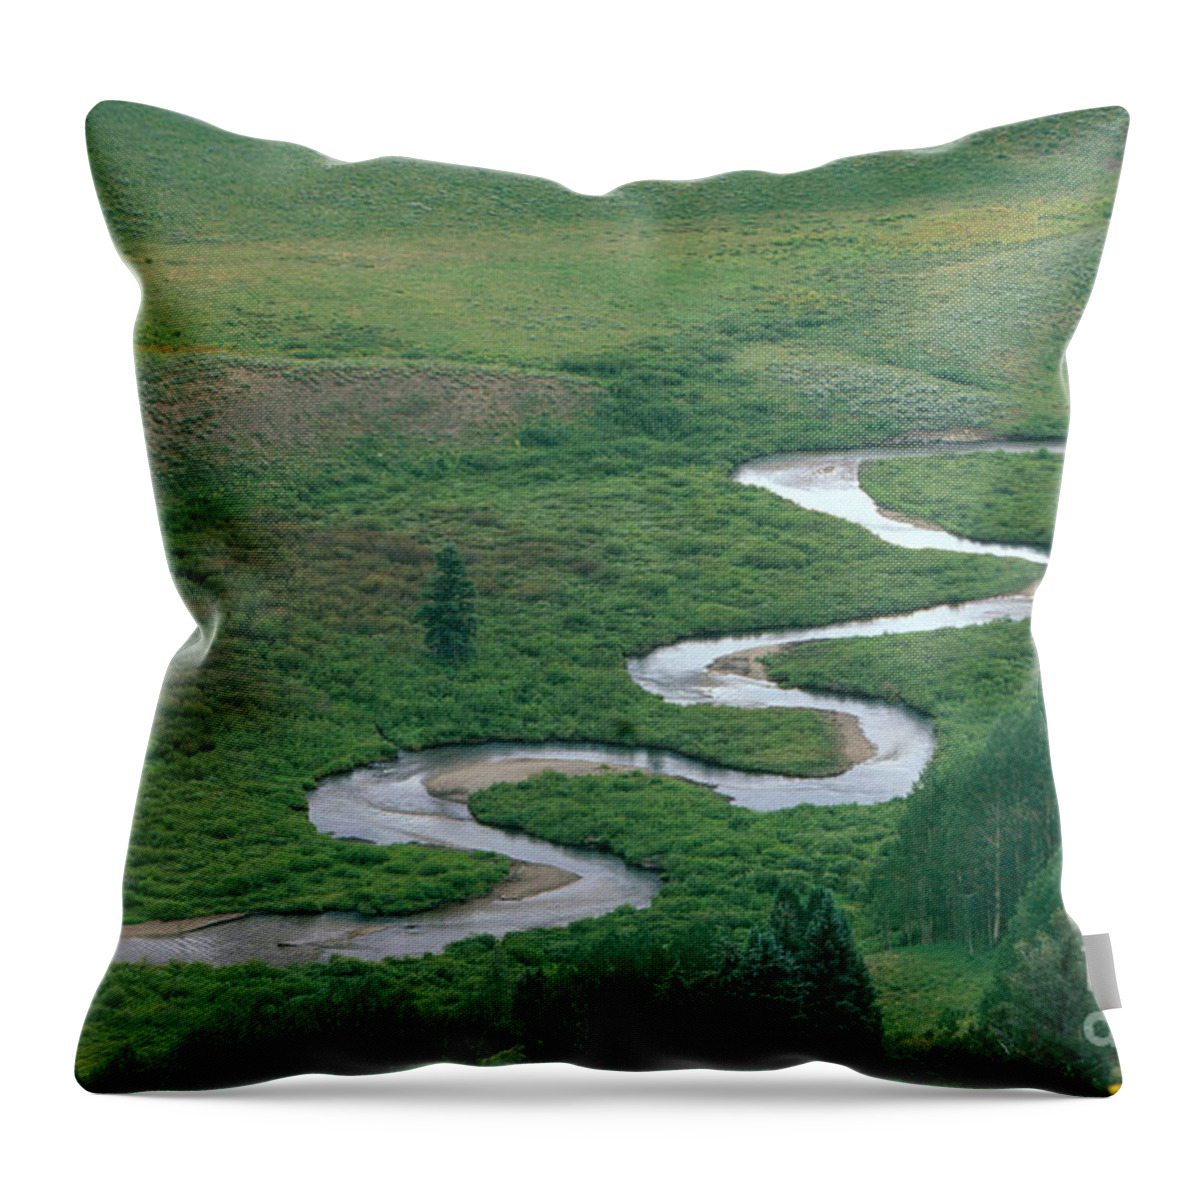 East River Throw Pillow featuring the photograph Meandering East River by David Davis